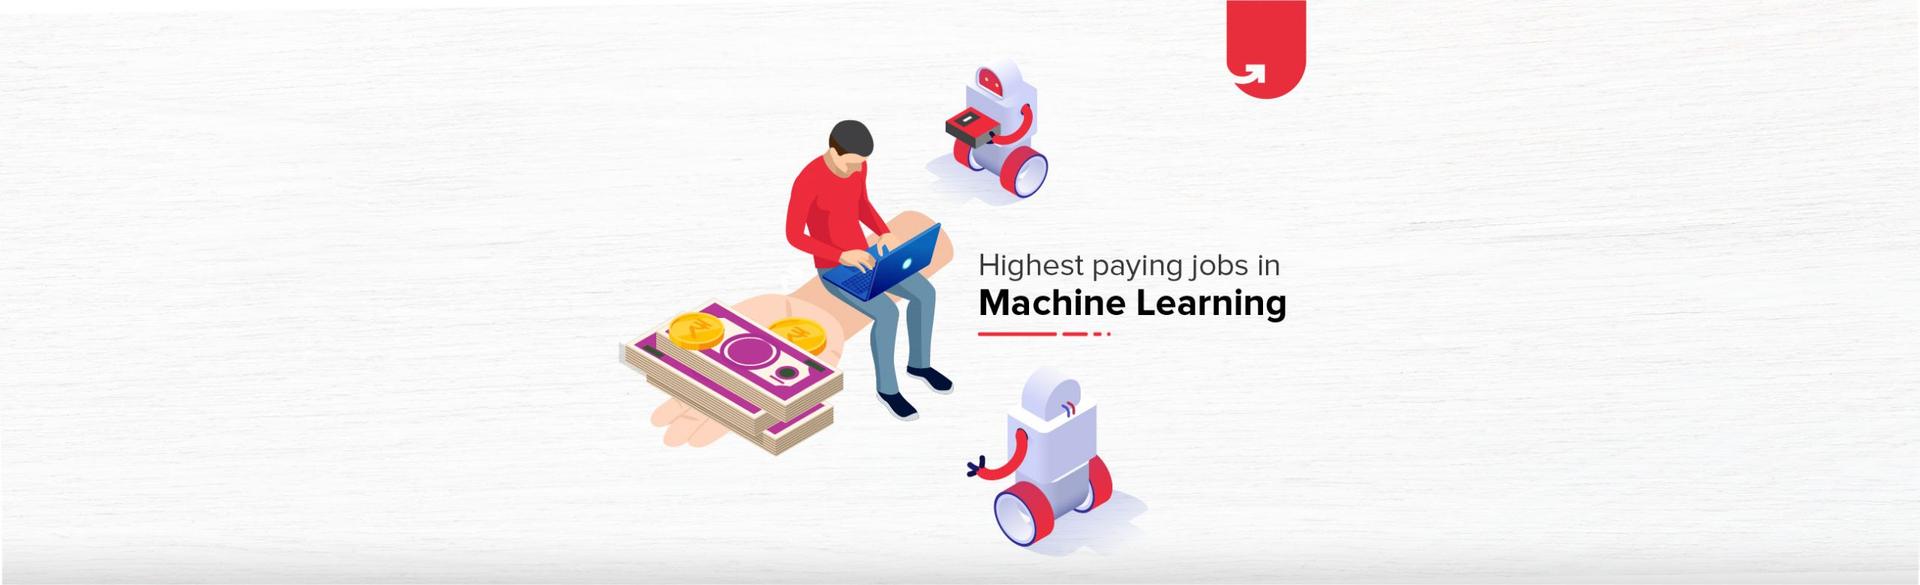 Top 10 Highest Paying Machine Learning Jobs in India [A Complete Report]